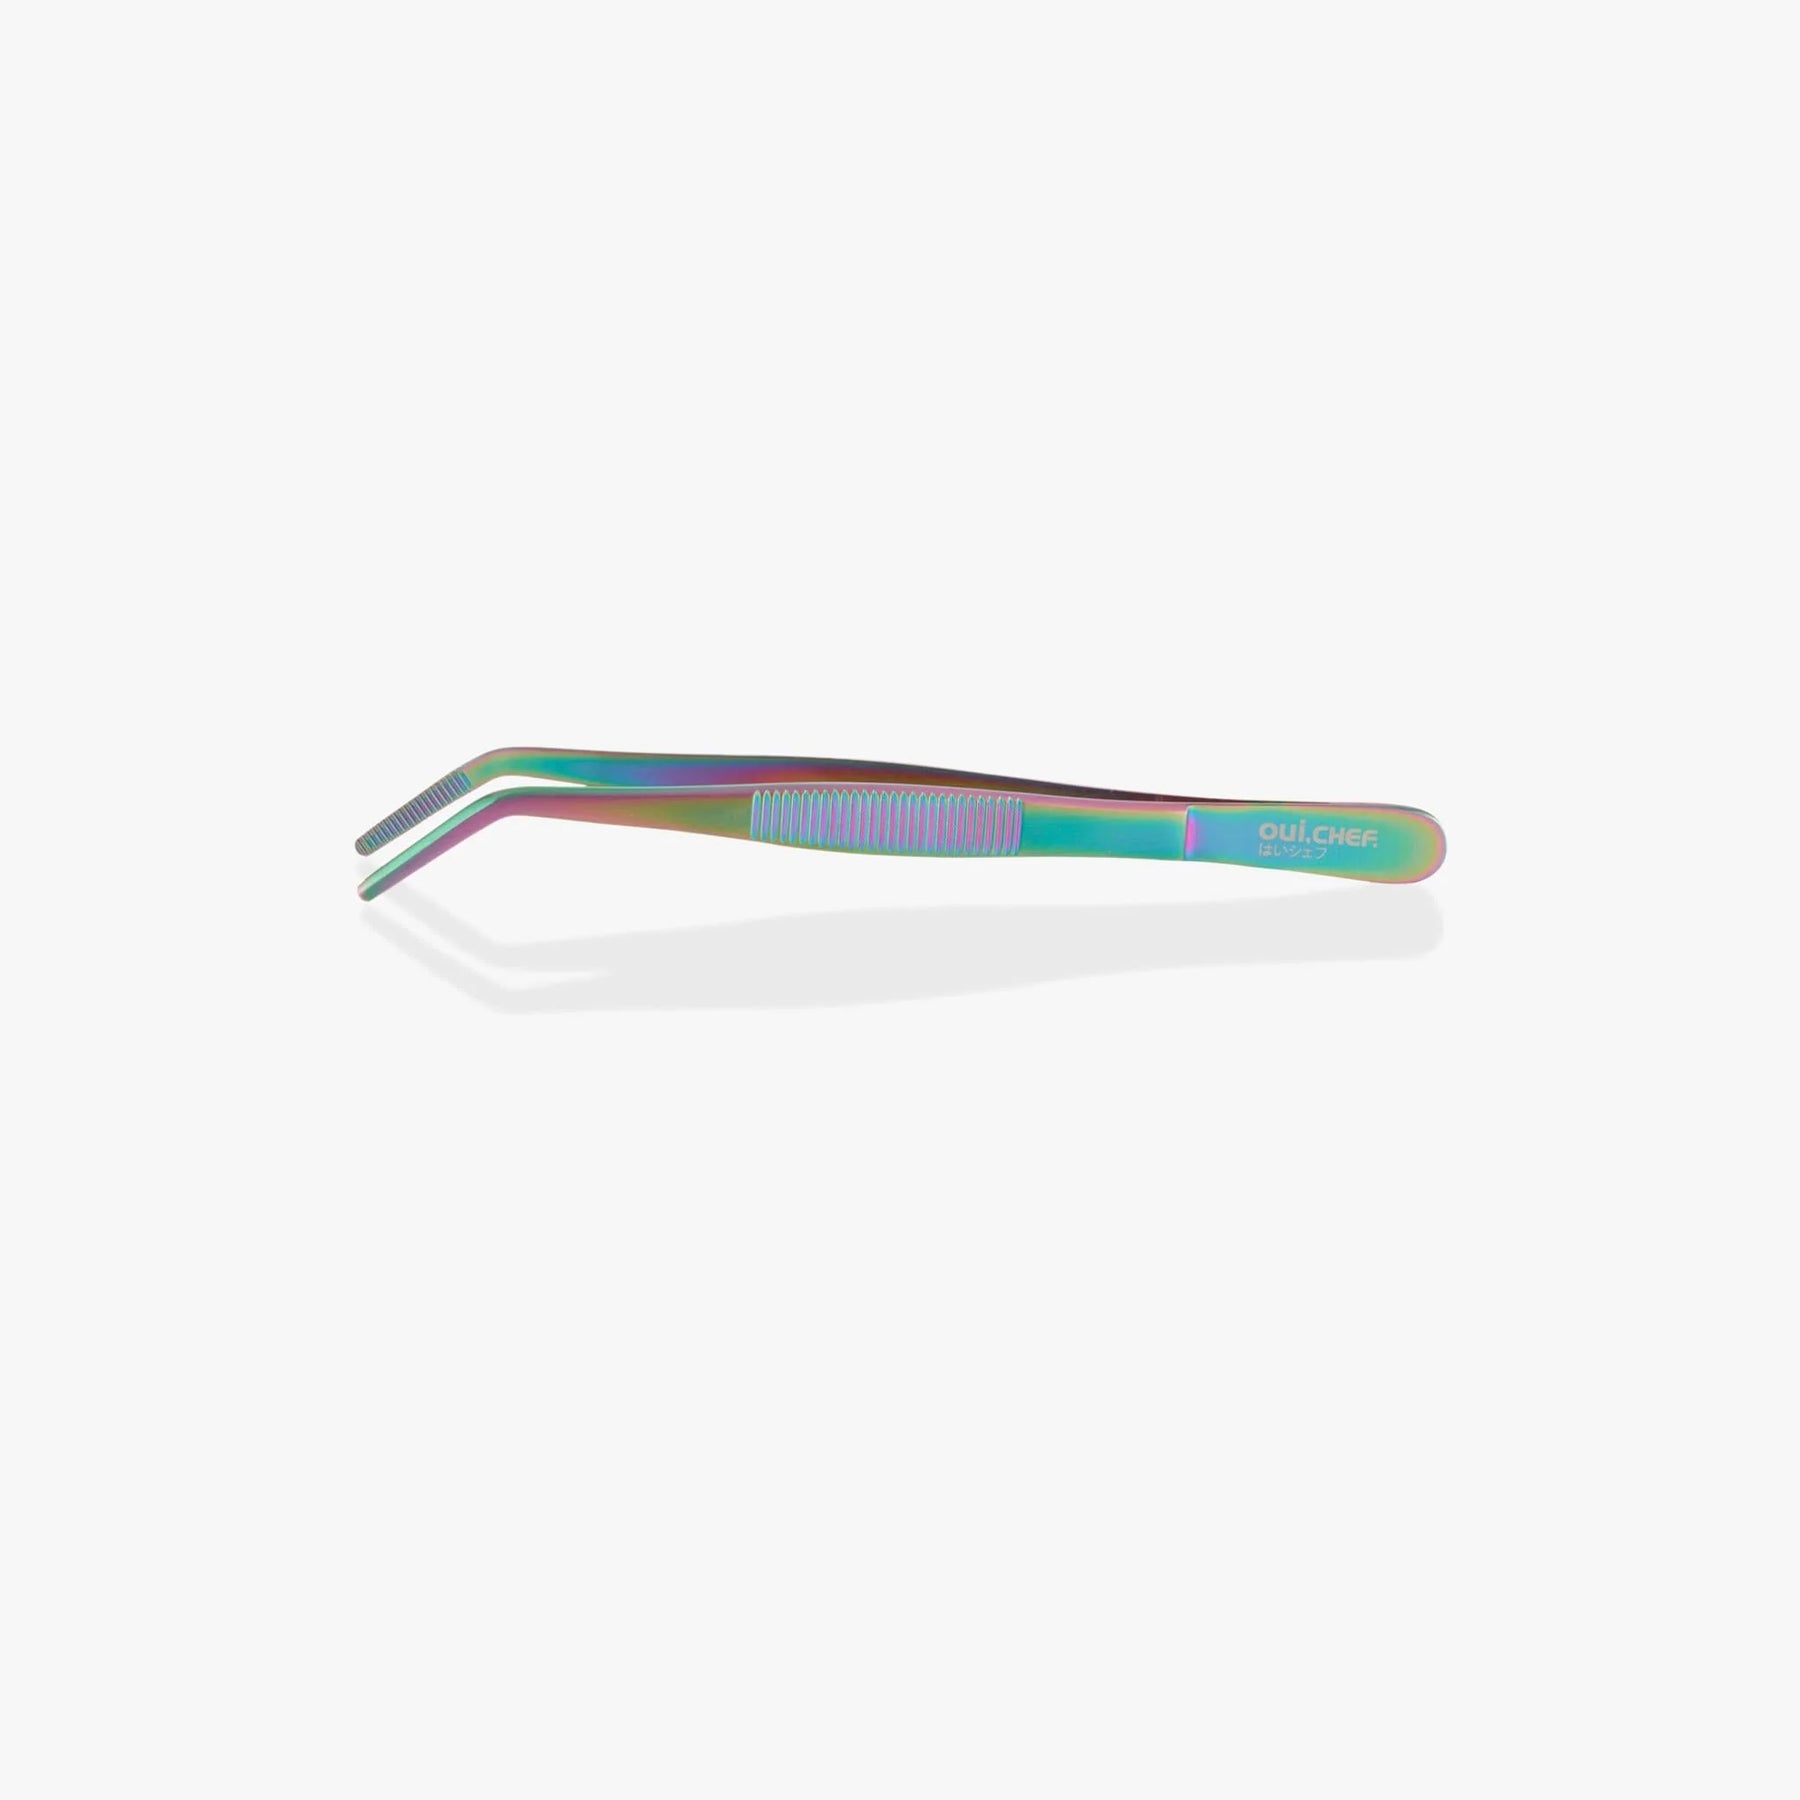 oui chef kitchen cooking tweezers oil slick 14cm angled tip side